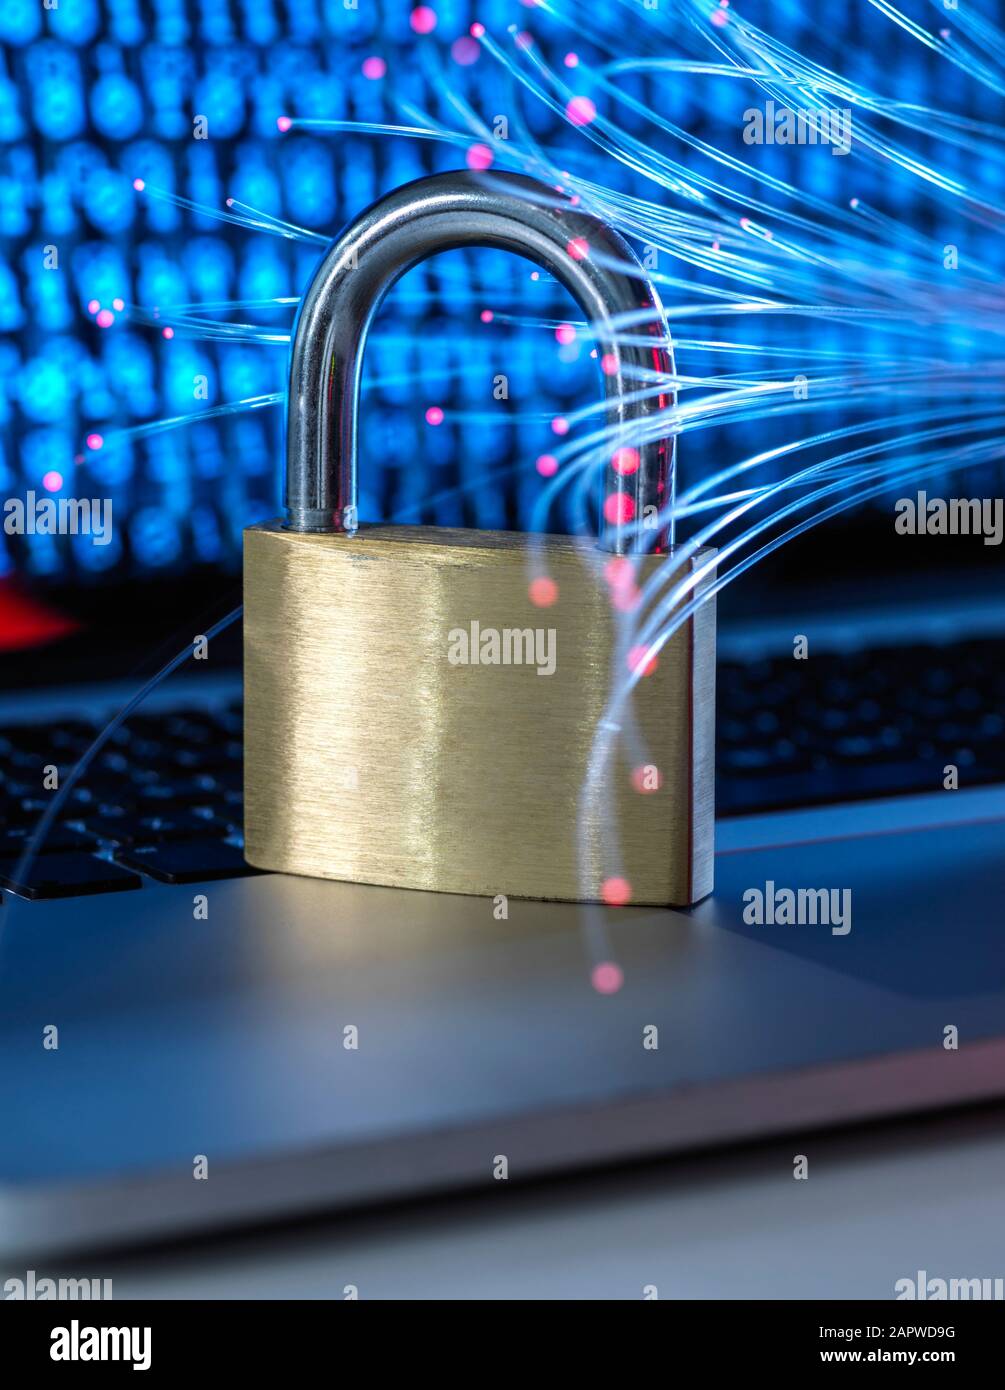 Cyber security, conceptual image Stock Photo